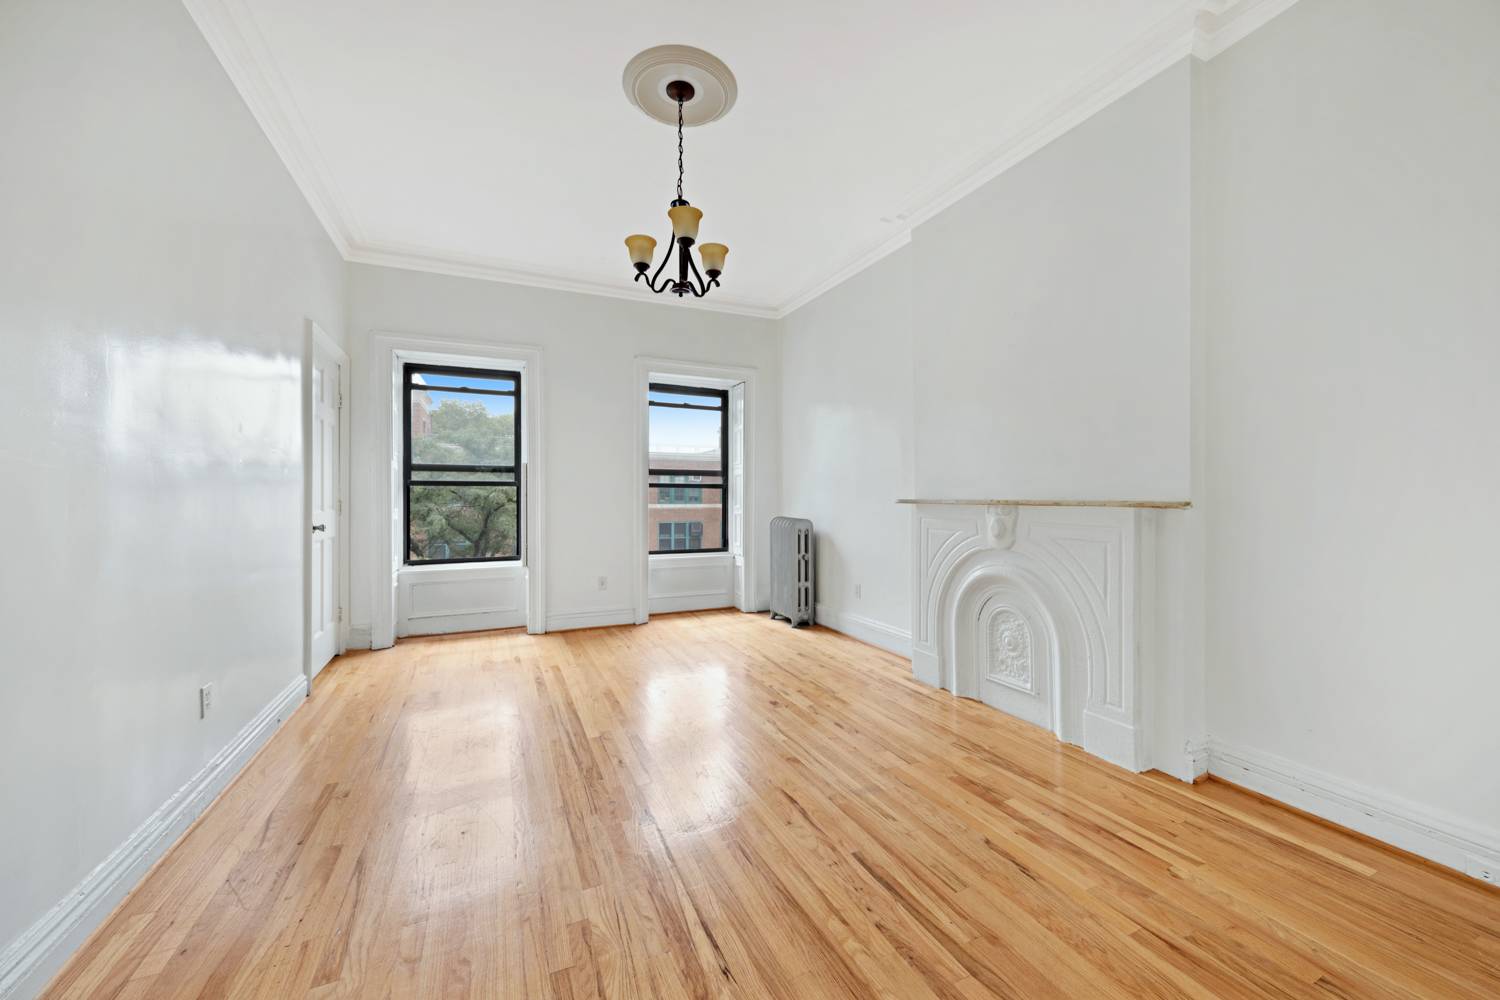 1. 5 bedroom available for rent on Bed Stuy Clinton Hill border.